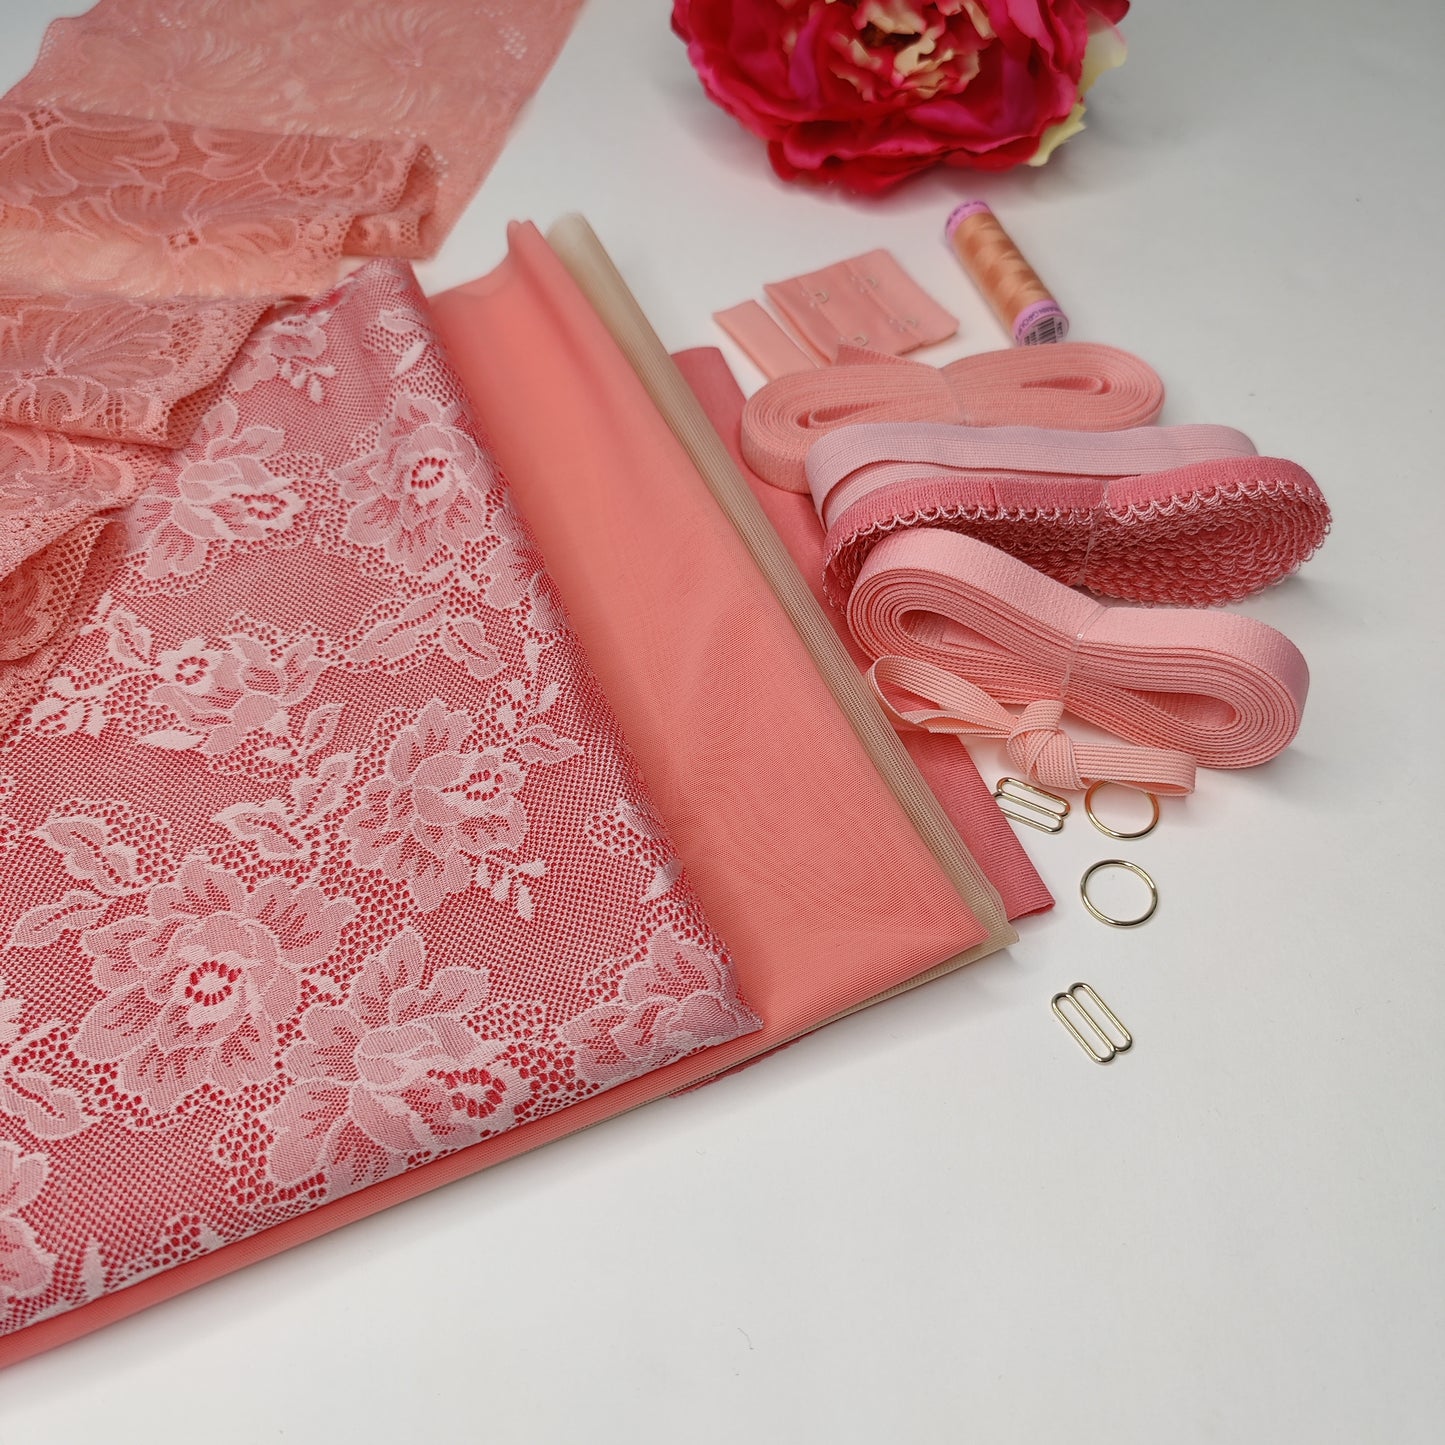 Large sewing set for 2x bras and panties or sewing package with <tc>lace</tc>, powernet and structured fabric in coral IDnsx1